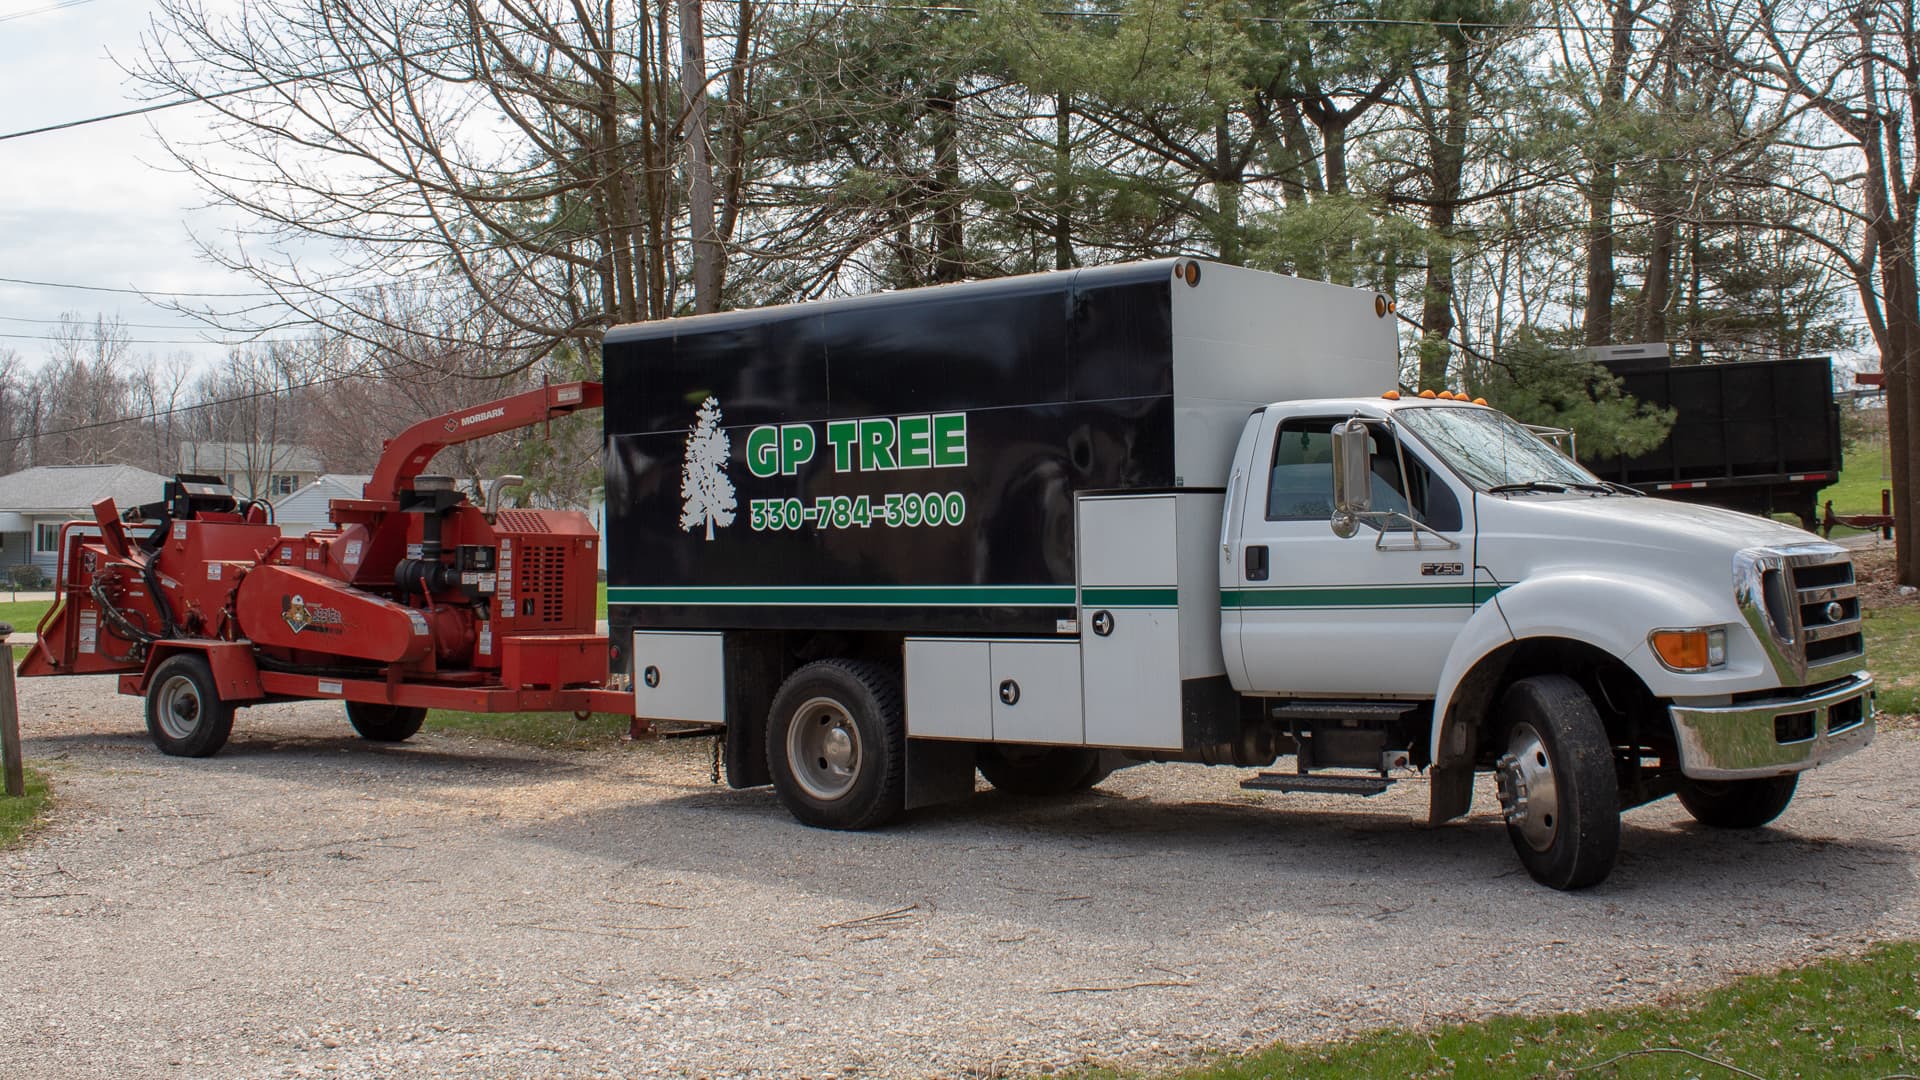 GP Tree Tree Removal Truck Akron OH